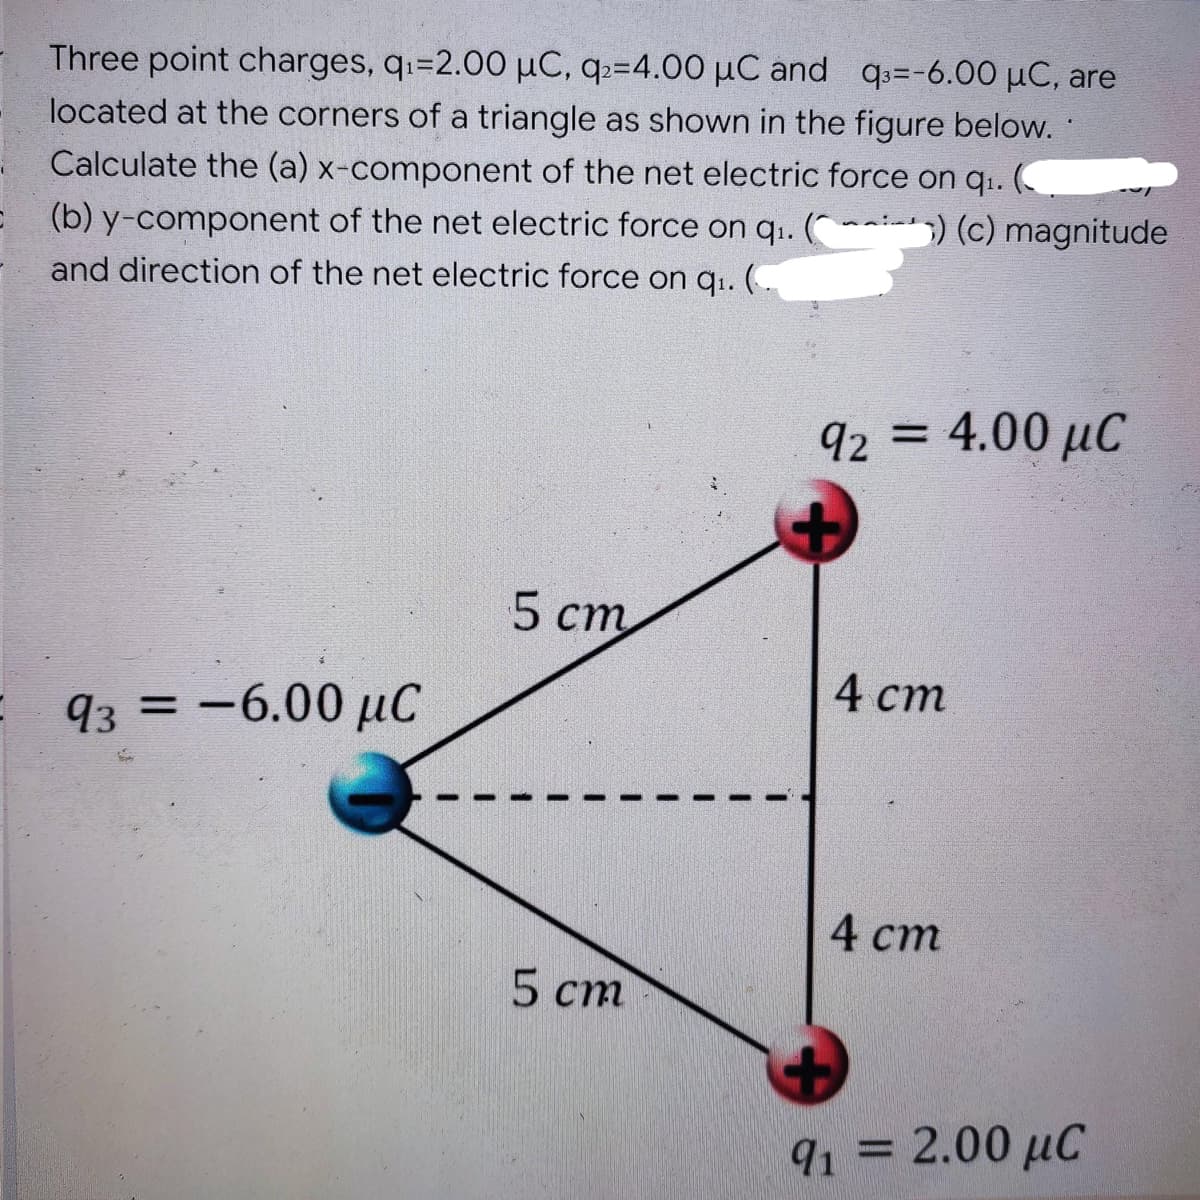 Three point charges, q₁=2.00 μC, q₂=4.00 μC and q3=-6.00 μC, are
located at the corners of a triangle as shown in the figure below..
Calculate the (a) x-component of the net electric force on q₁. (
) (c) magnitude
= (b) y-component of the net electric force on q₁. (
and direction of the net electric force on q₁. (
5 cm
93 = -6.00 μC
5 cm
I
I
I
I
92 = 4.00 μC
4 cm
4 cm
91 = 2.00 μC
με